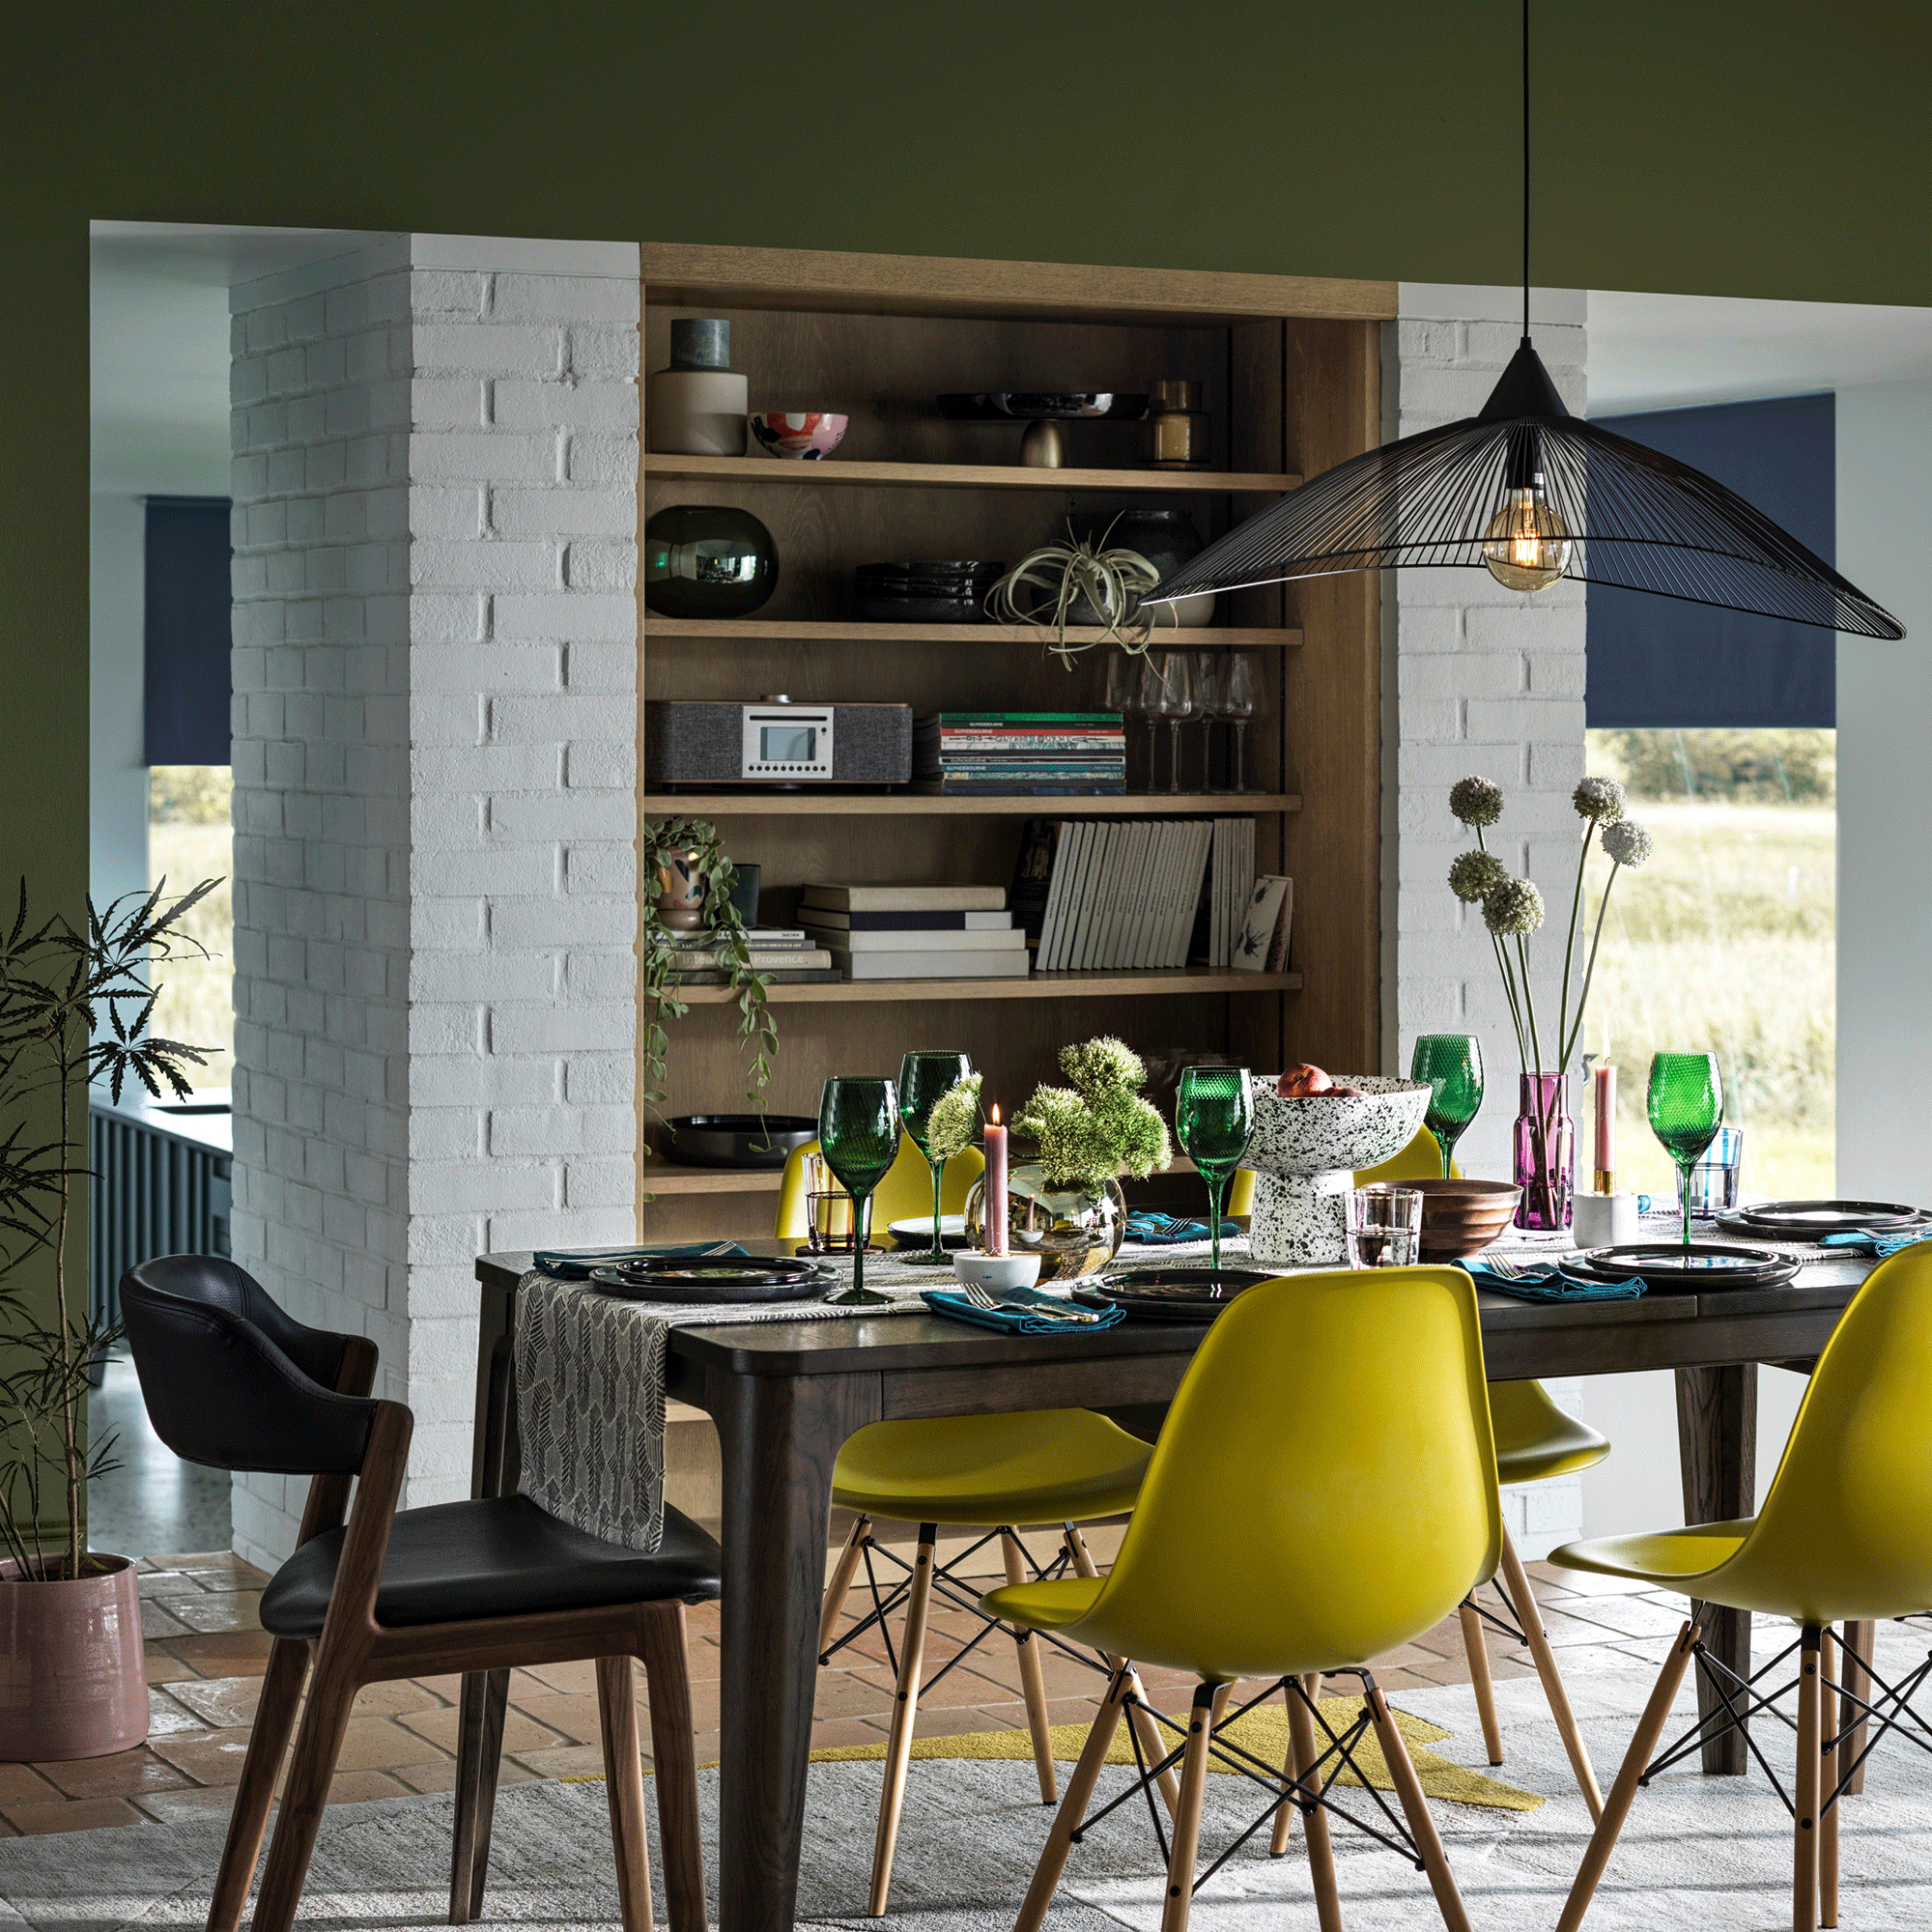 Table with yellow chair in dining room